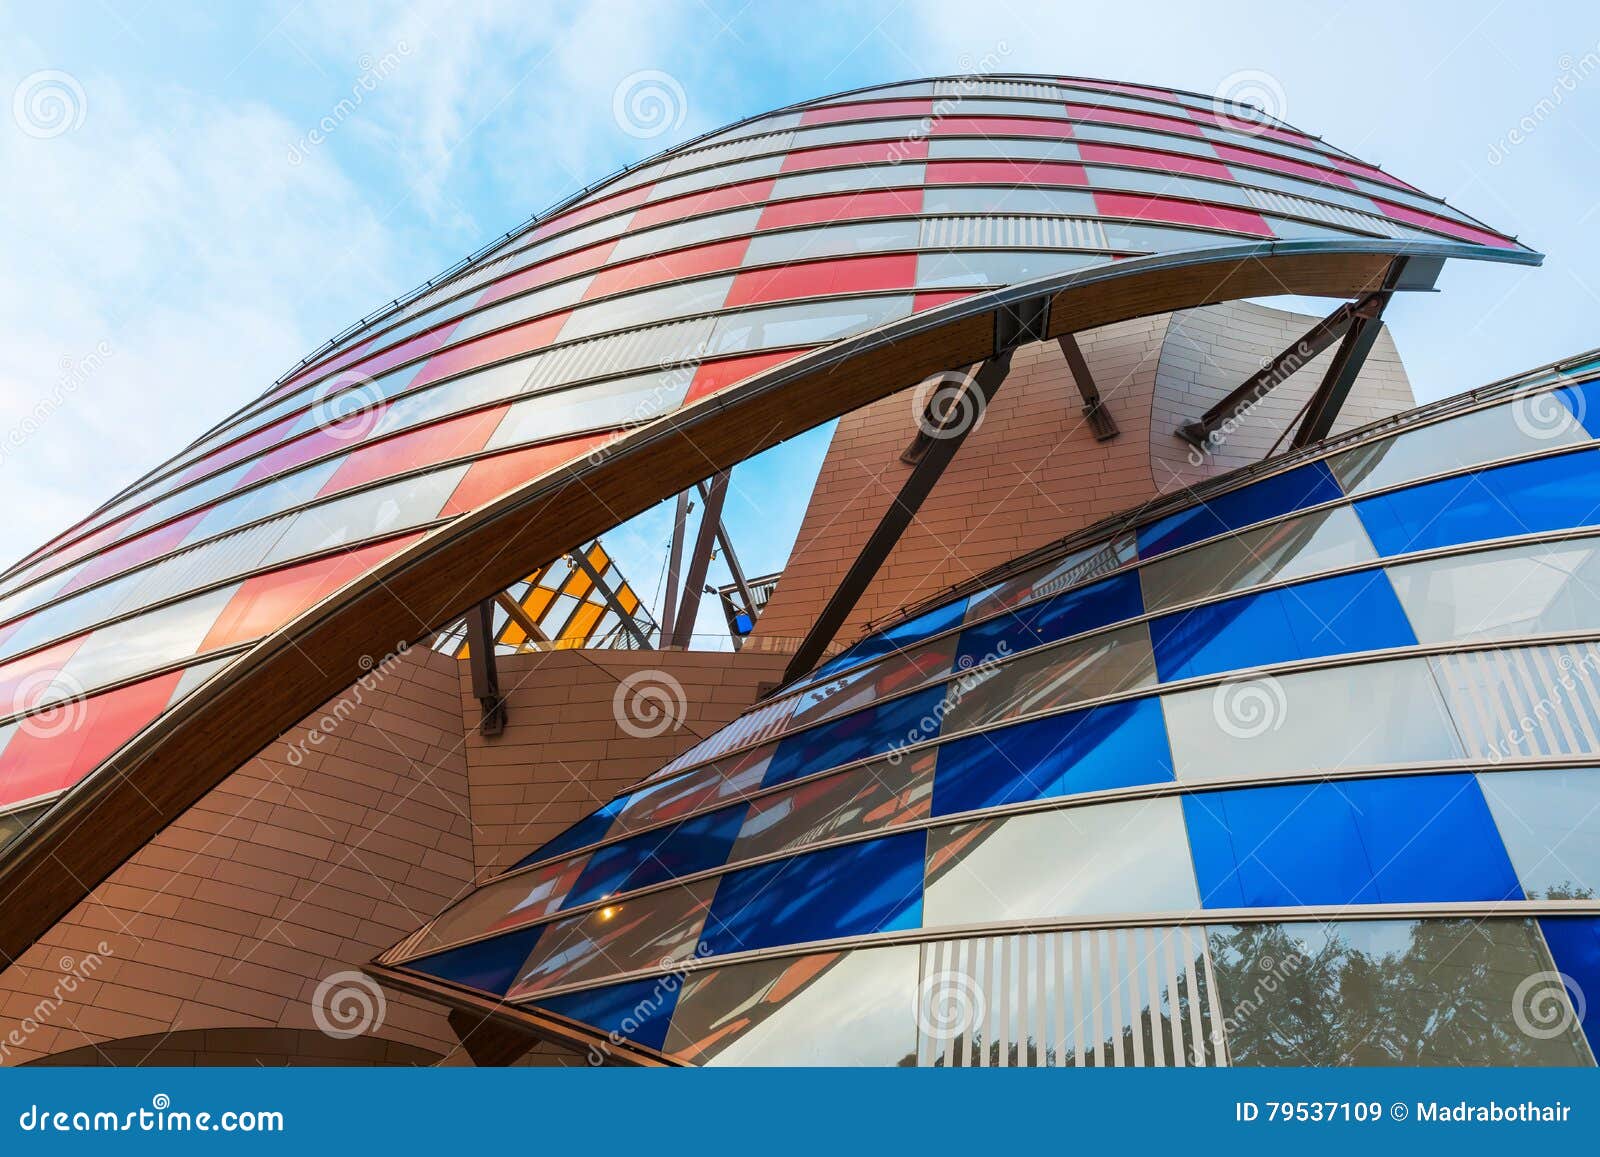 Louis Vuitton Foundation Designed By Frank Gehry Editorial Stock Image - Image of park, europe ...